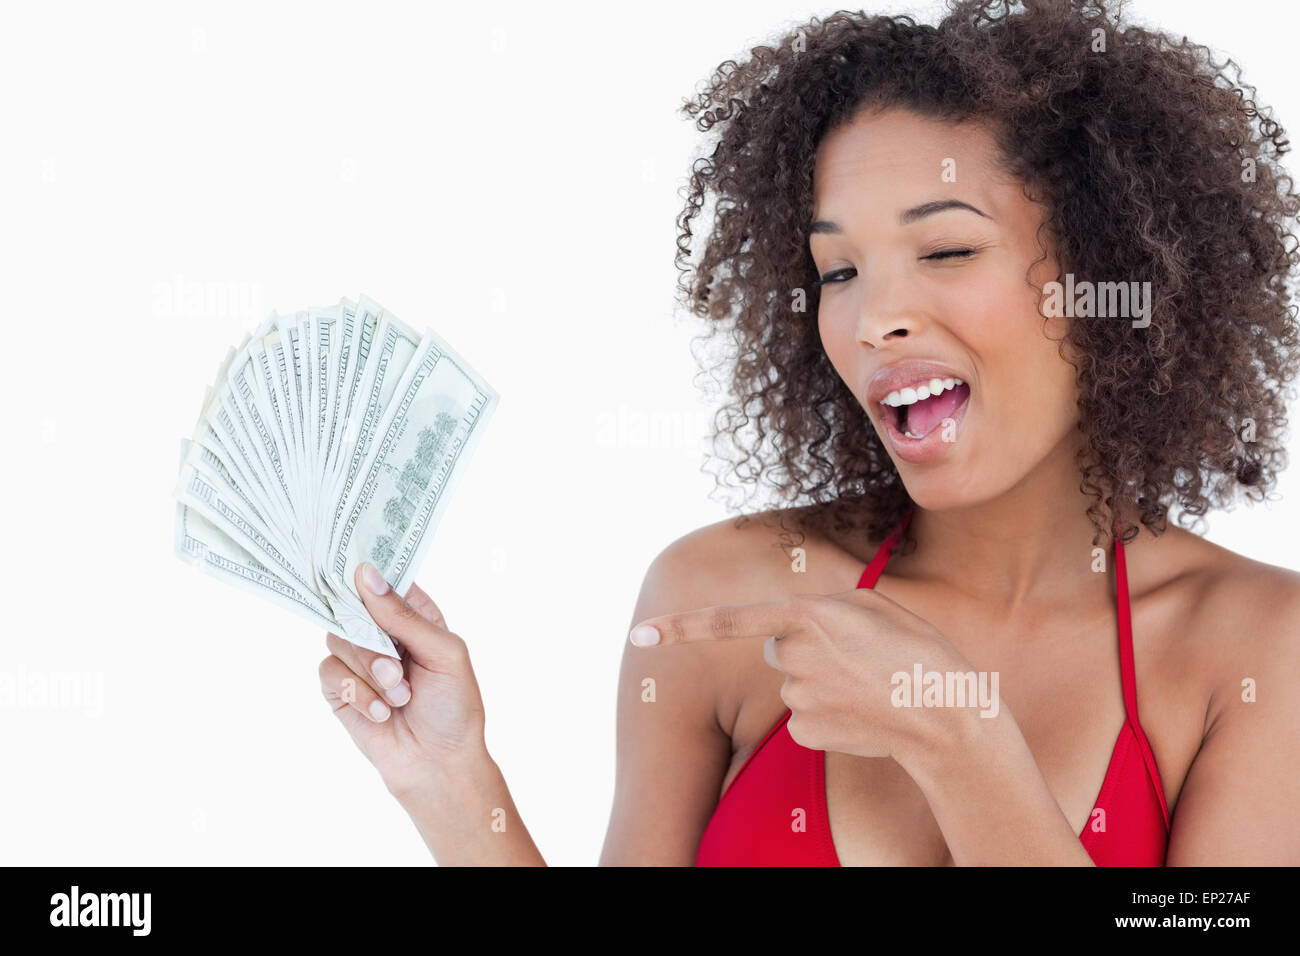 Young woman blinking an eye while holding a fan of notes Stock Photo